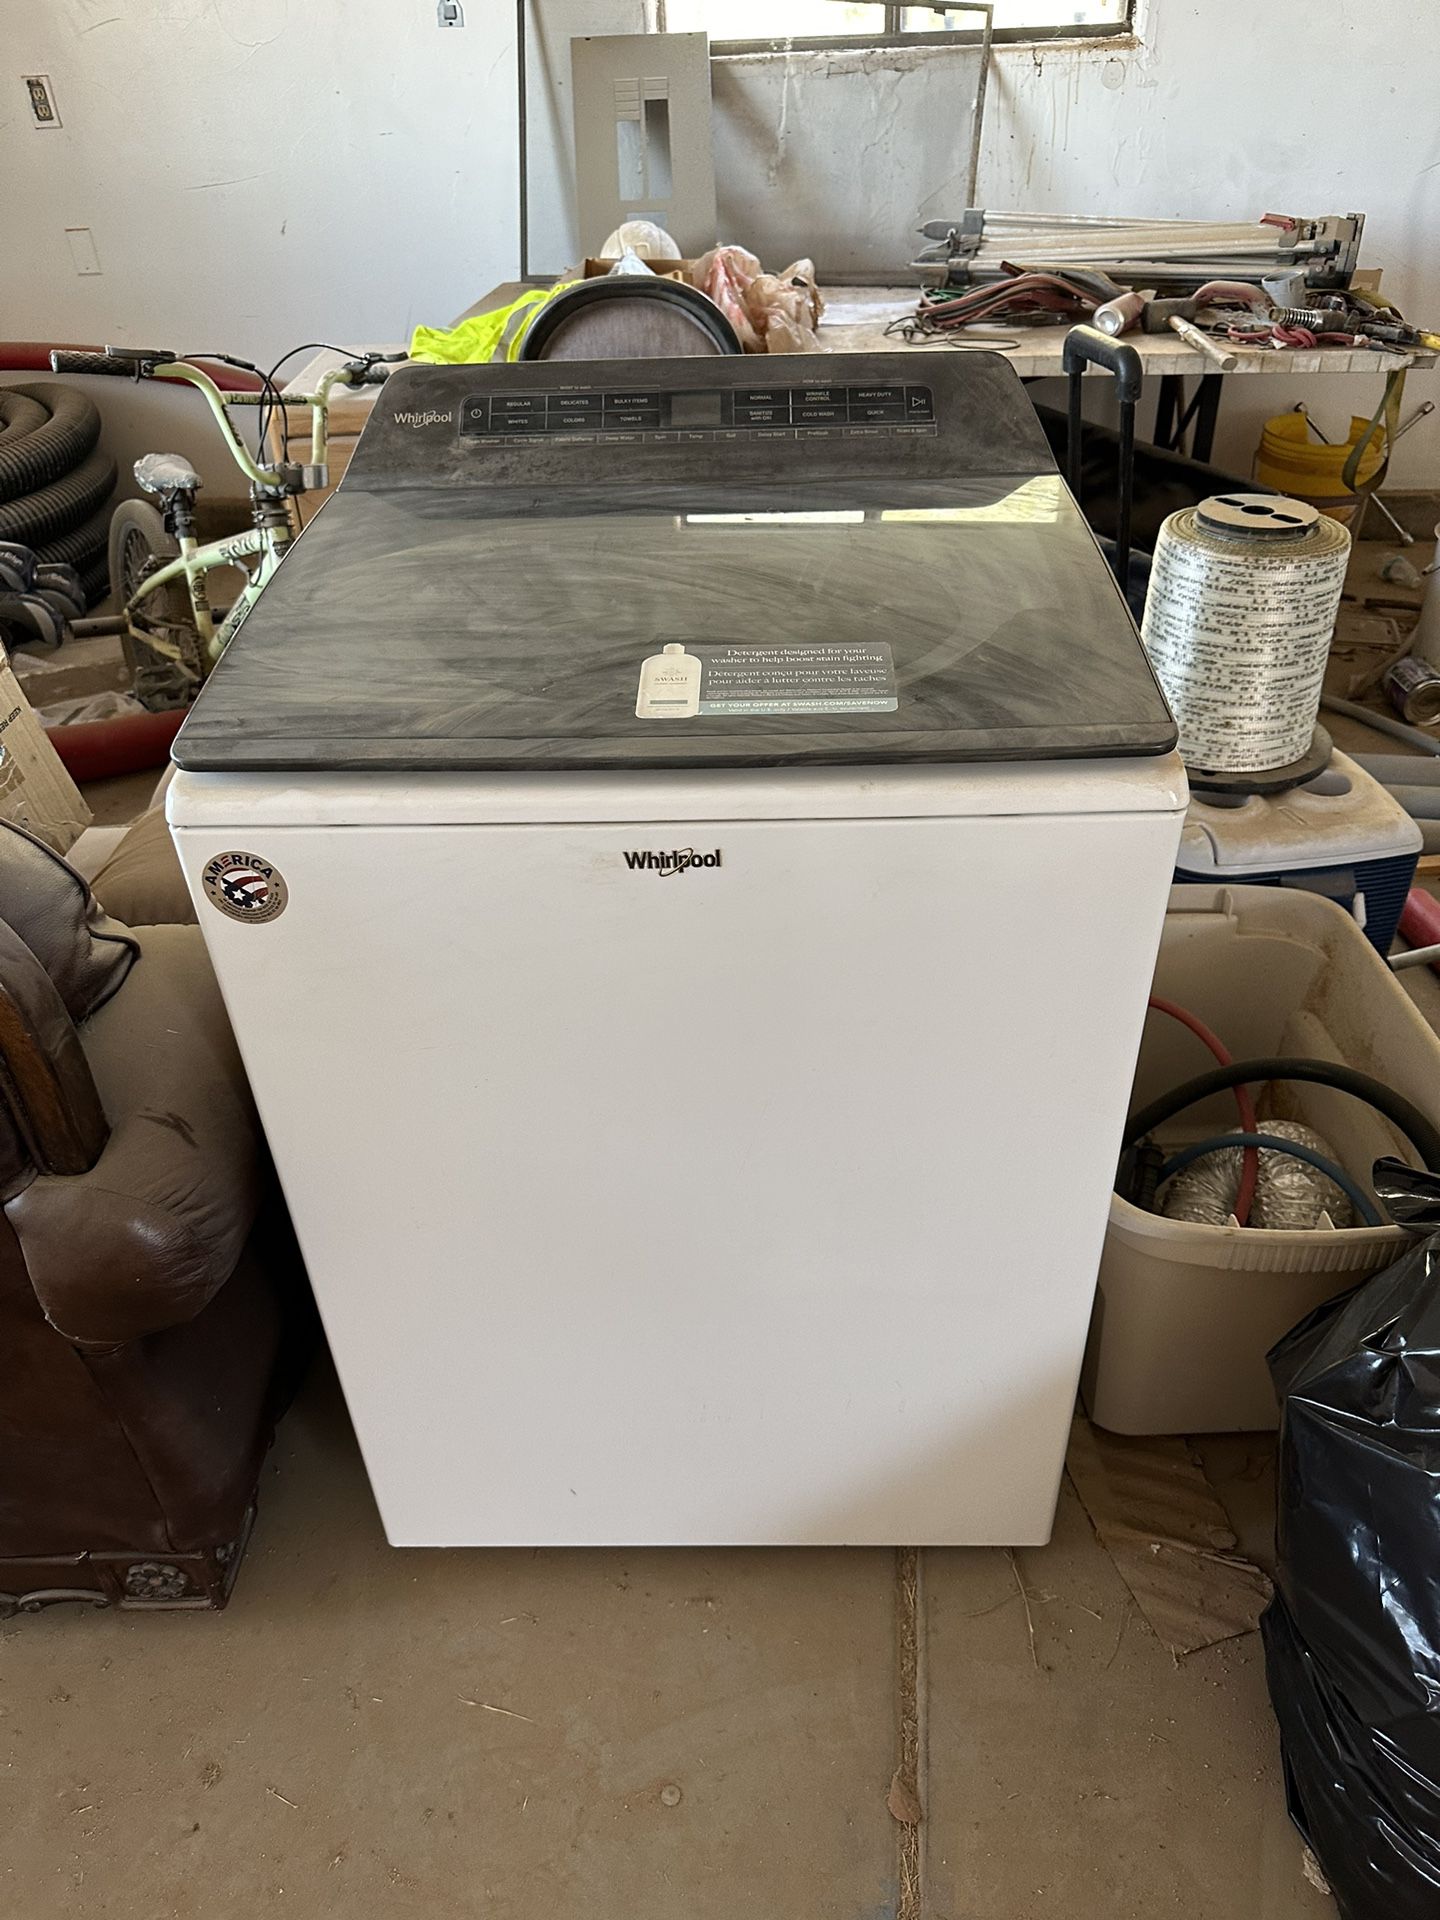 Whirlpool Washer And Dryer. 